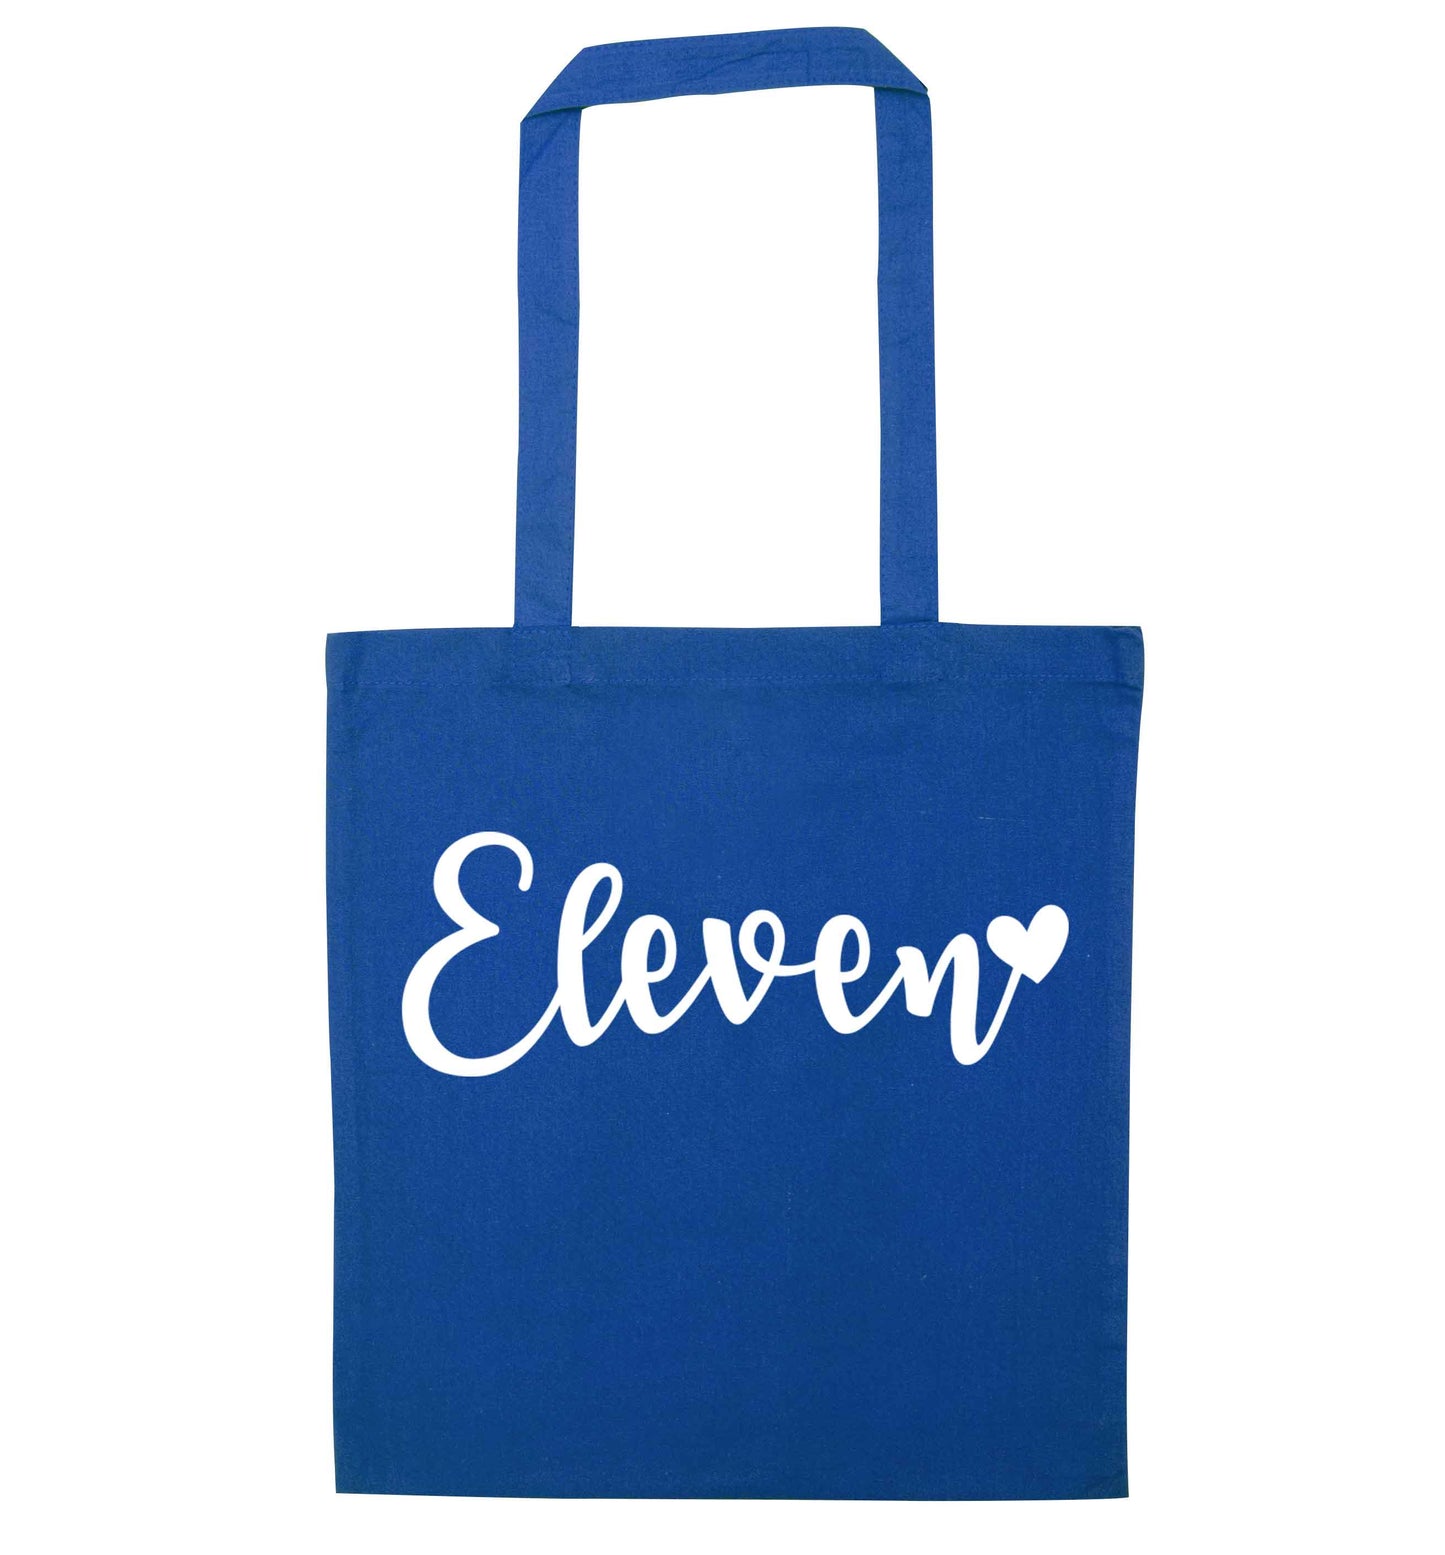 Eleven and heart! blue tote bag